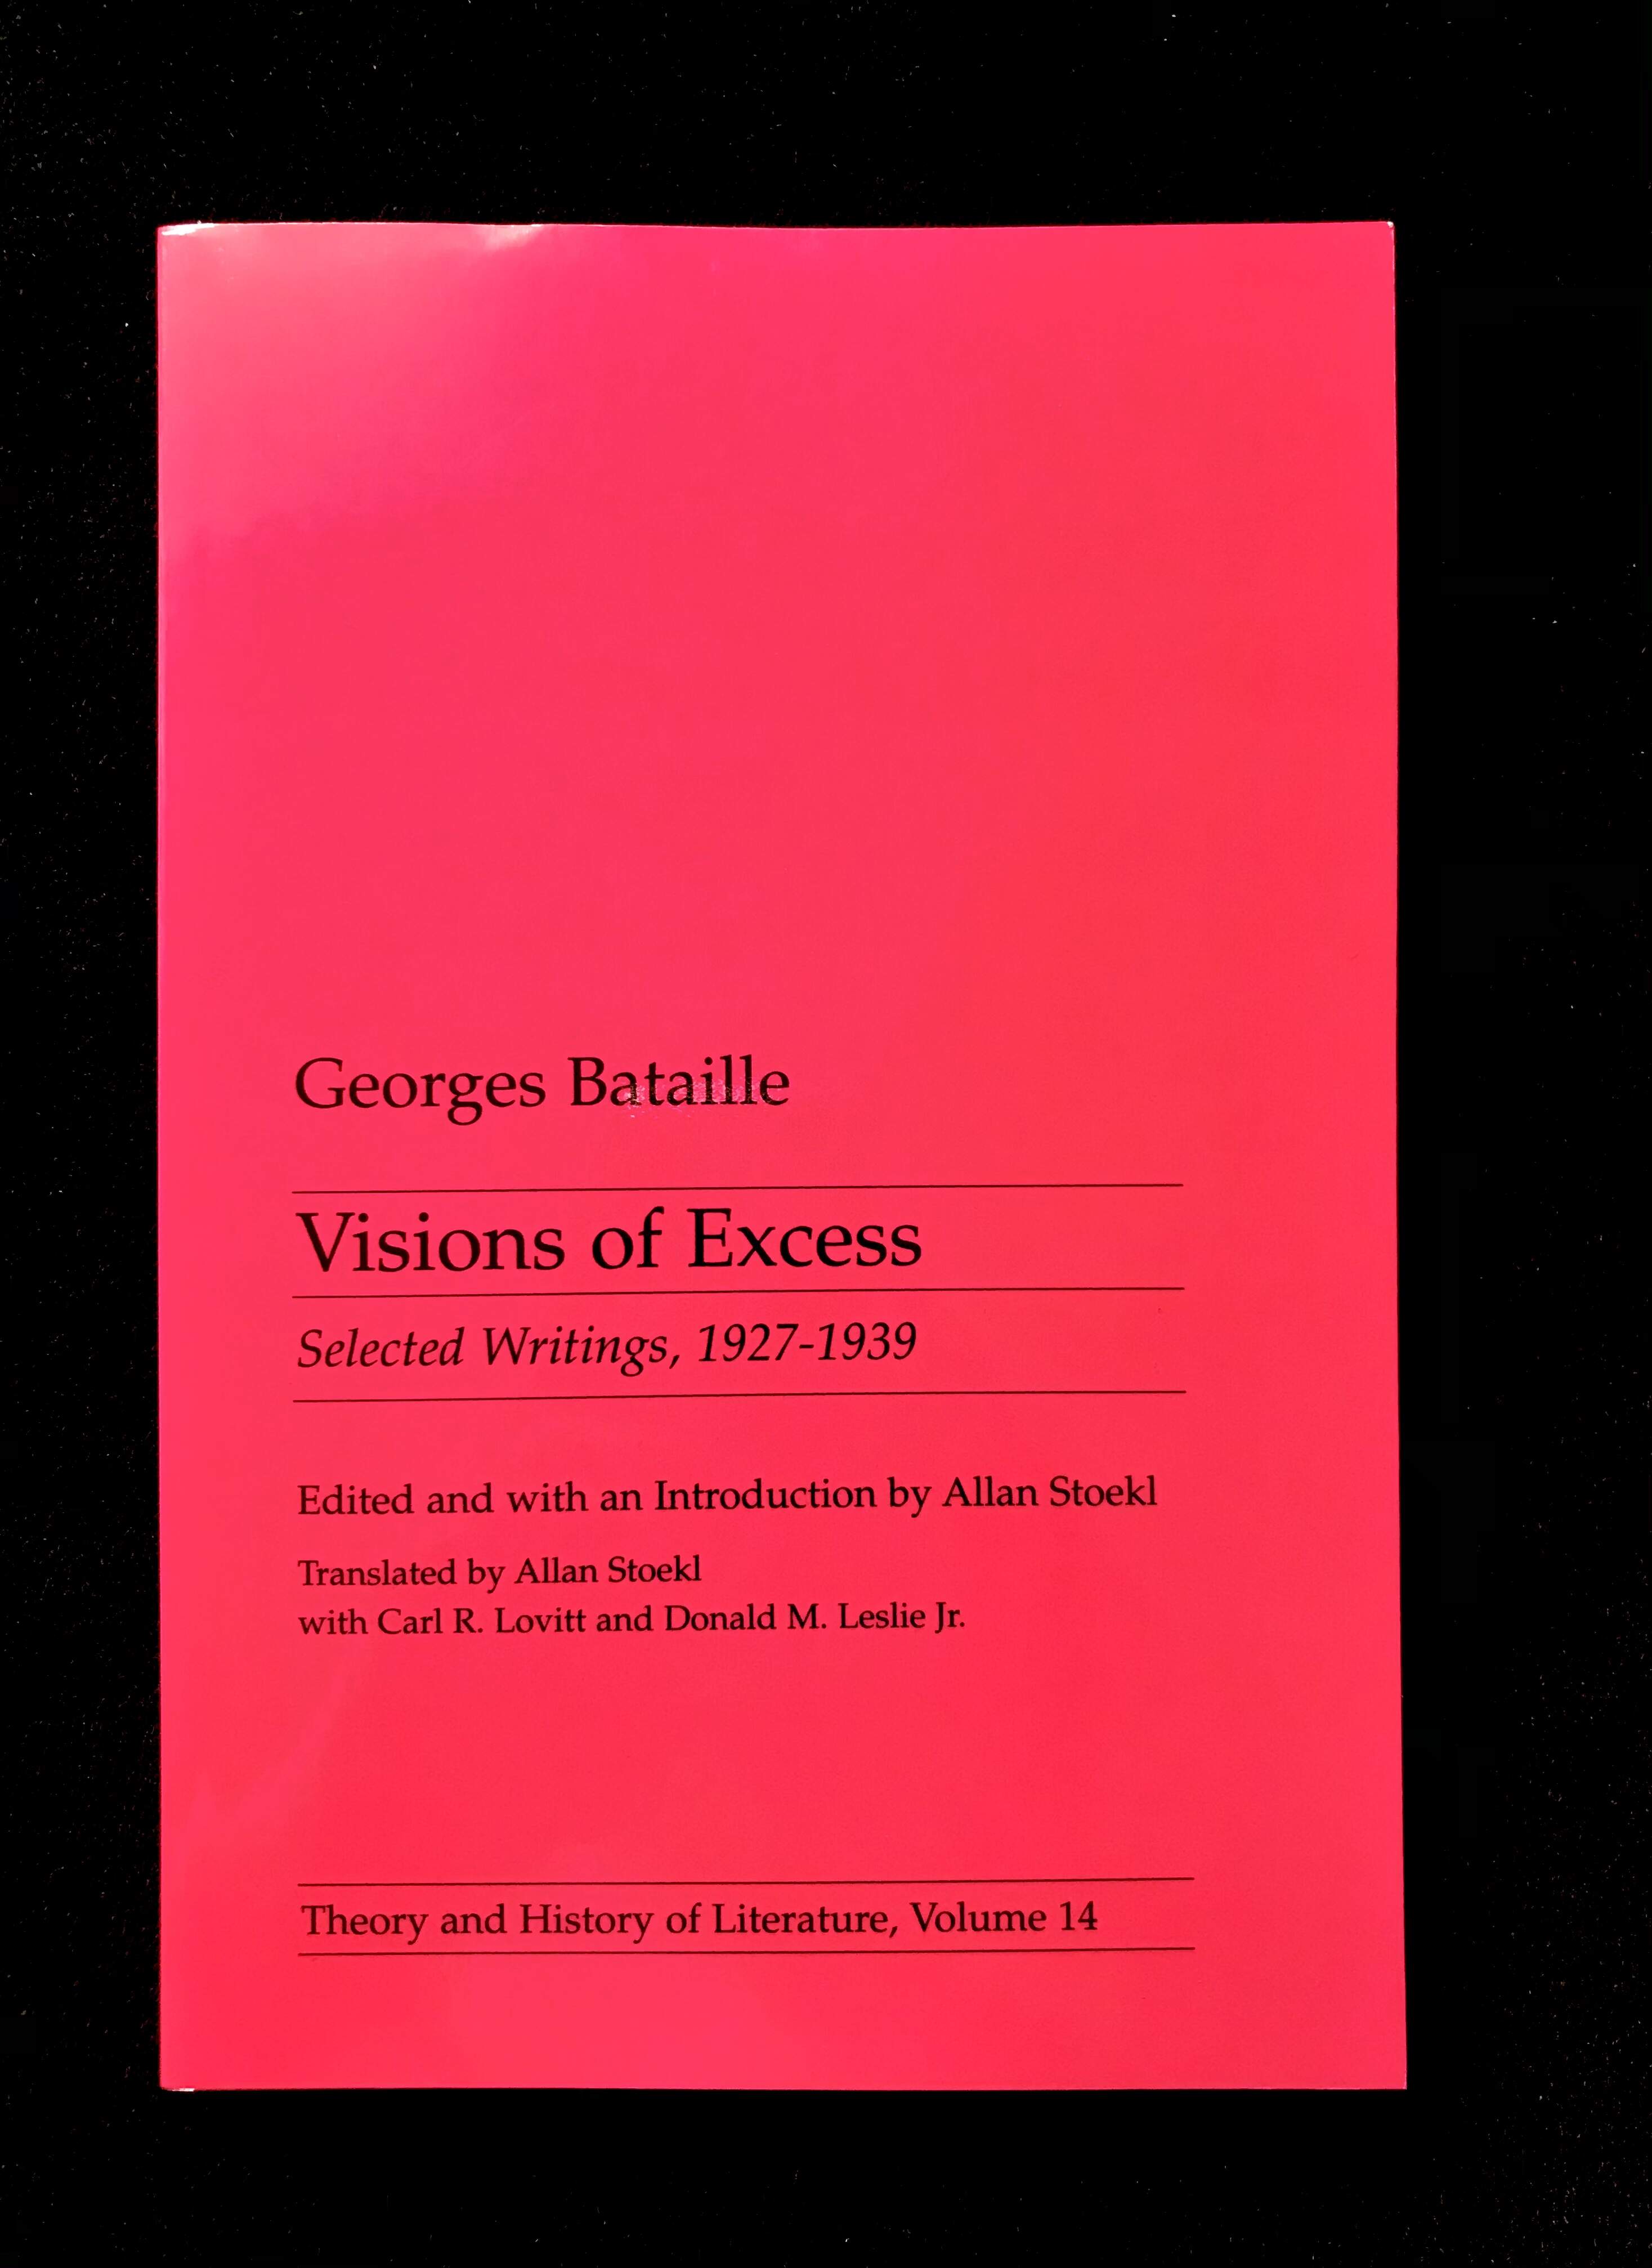 Visions of Excess Selected Writings, 1927- 1939 by Georges Bataille